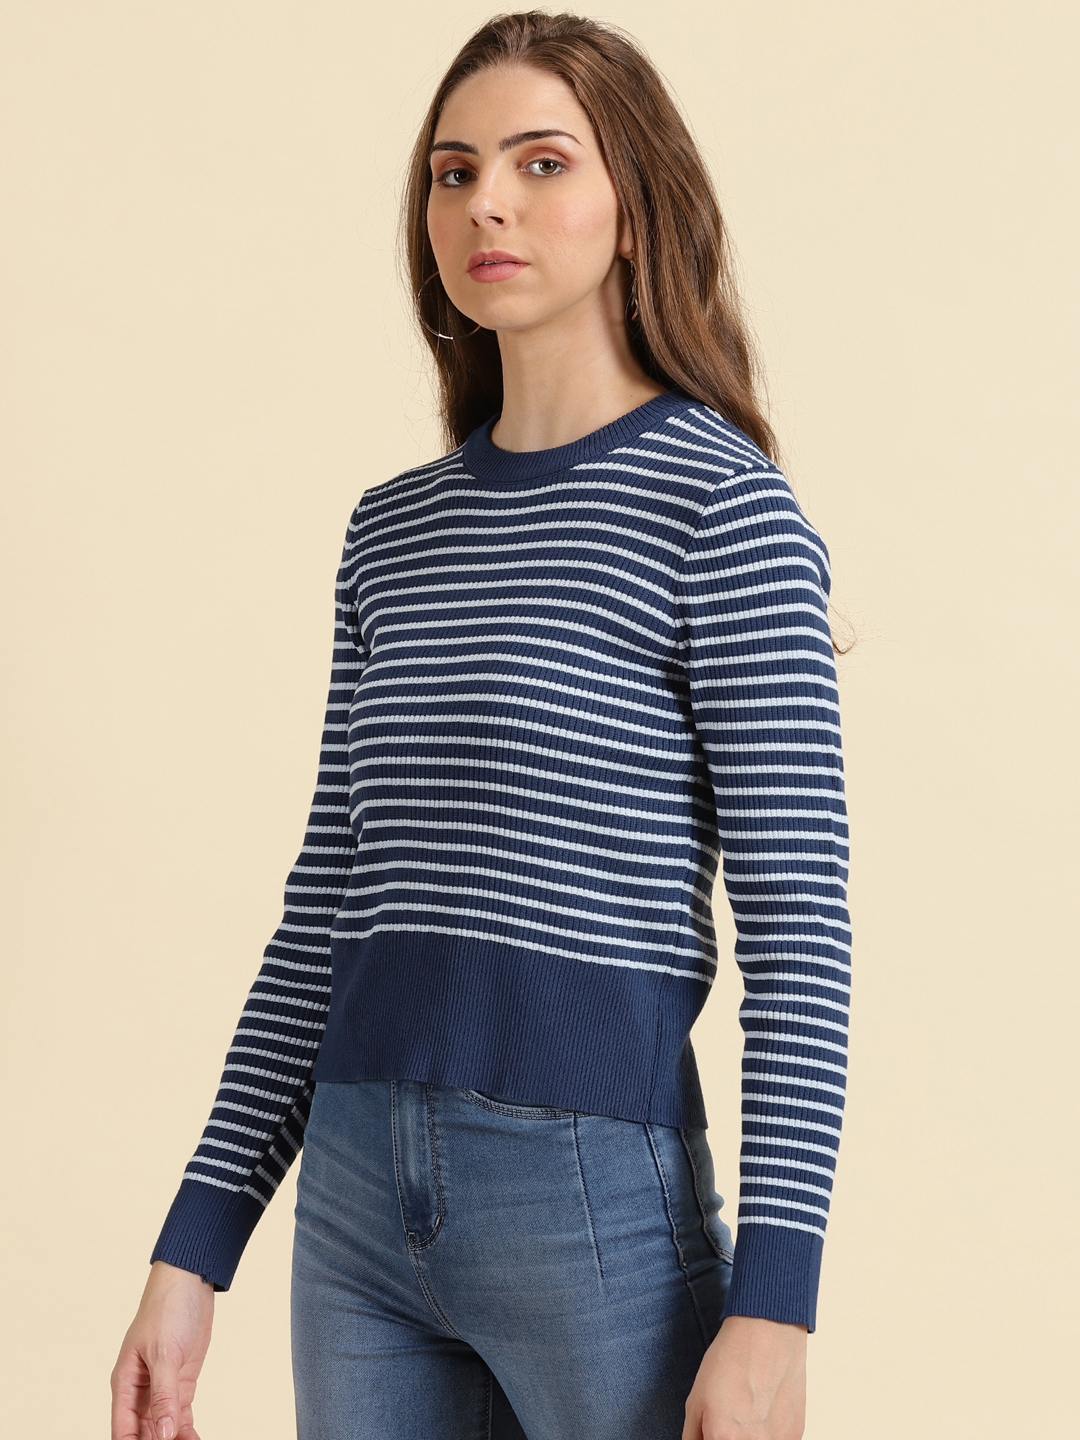 Showoff | SHOWOFF Women's High Neck Striped NavyBlue Fitted Regular Top 2